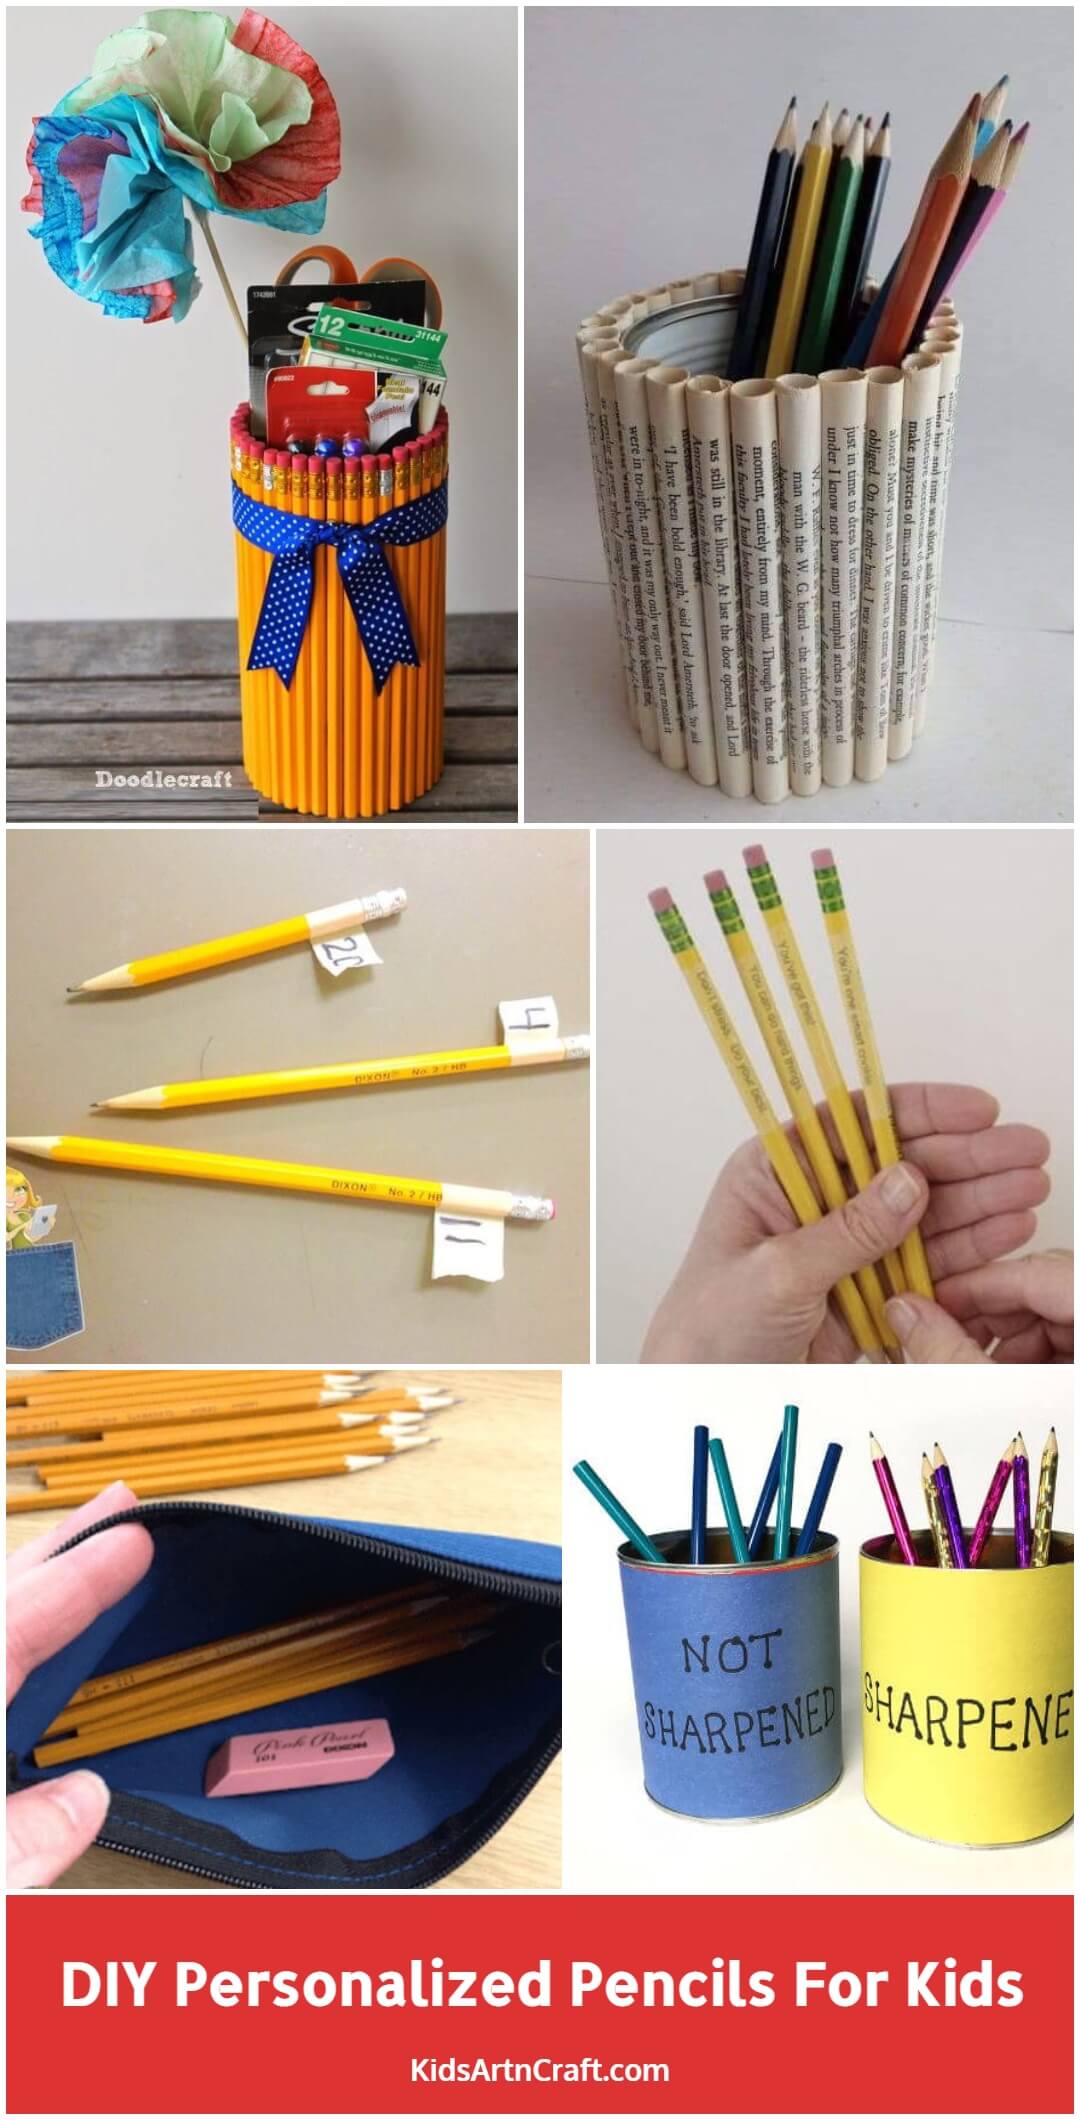 DIY Personalized Pencils for Kids